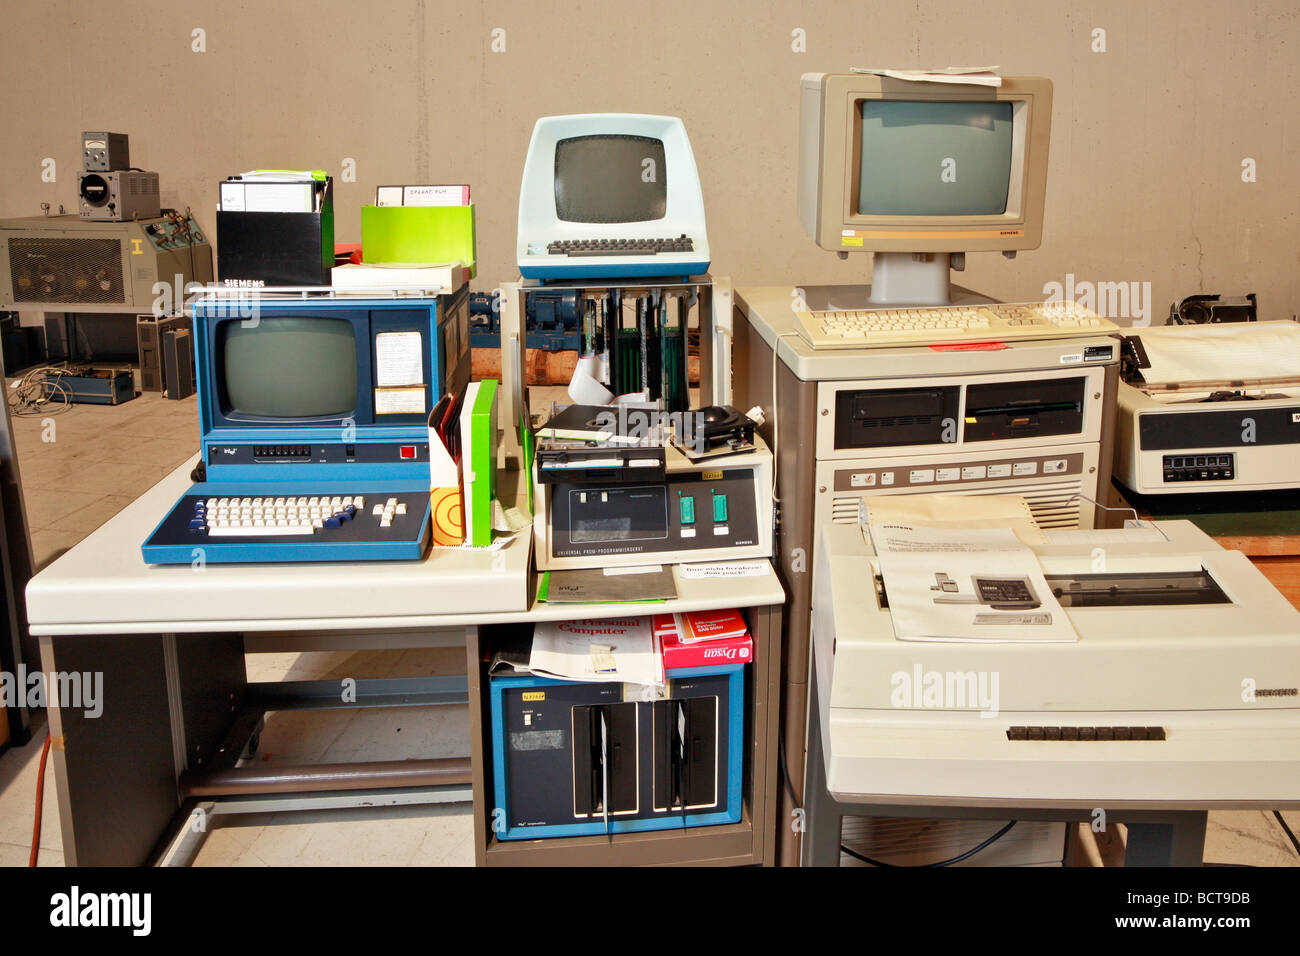 Historical computers, programming workstation on the left, remote control-computer on the right, Radom, Technology Museum, Rais Stock Photo